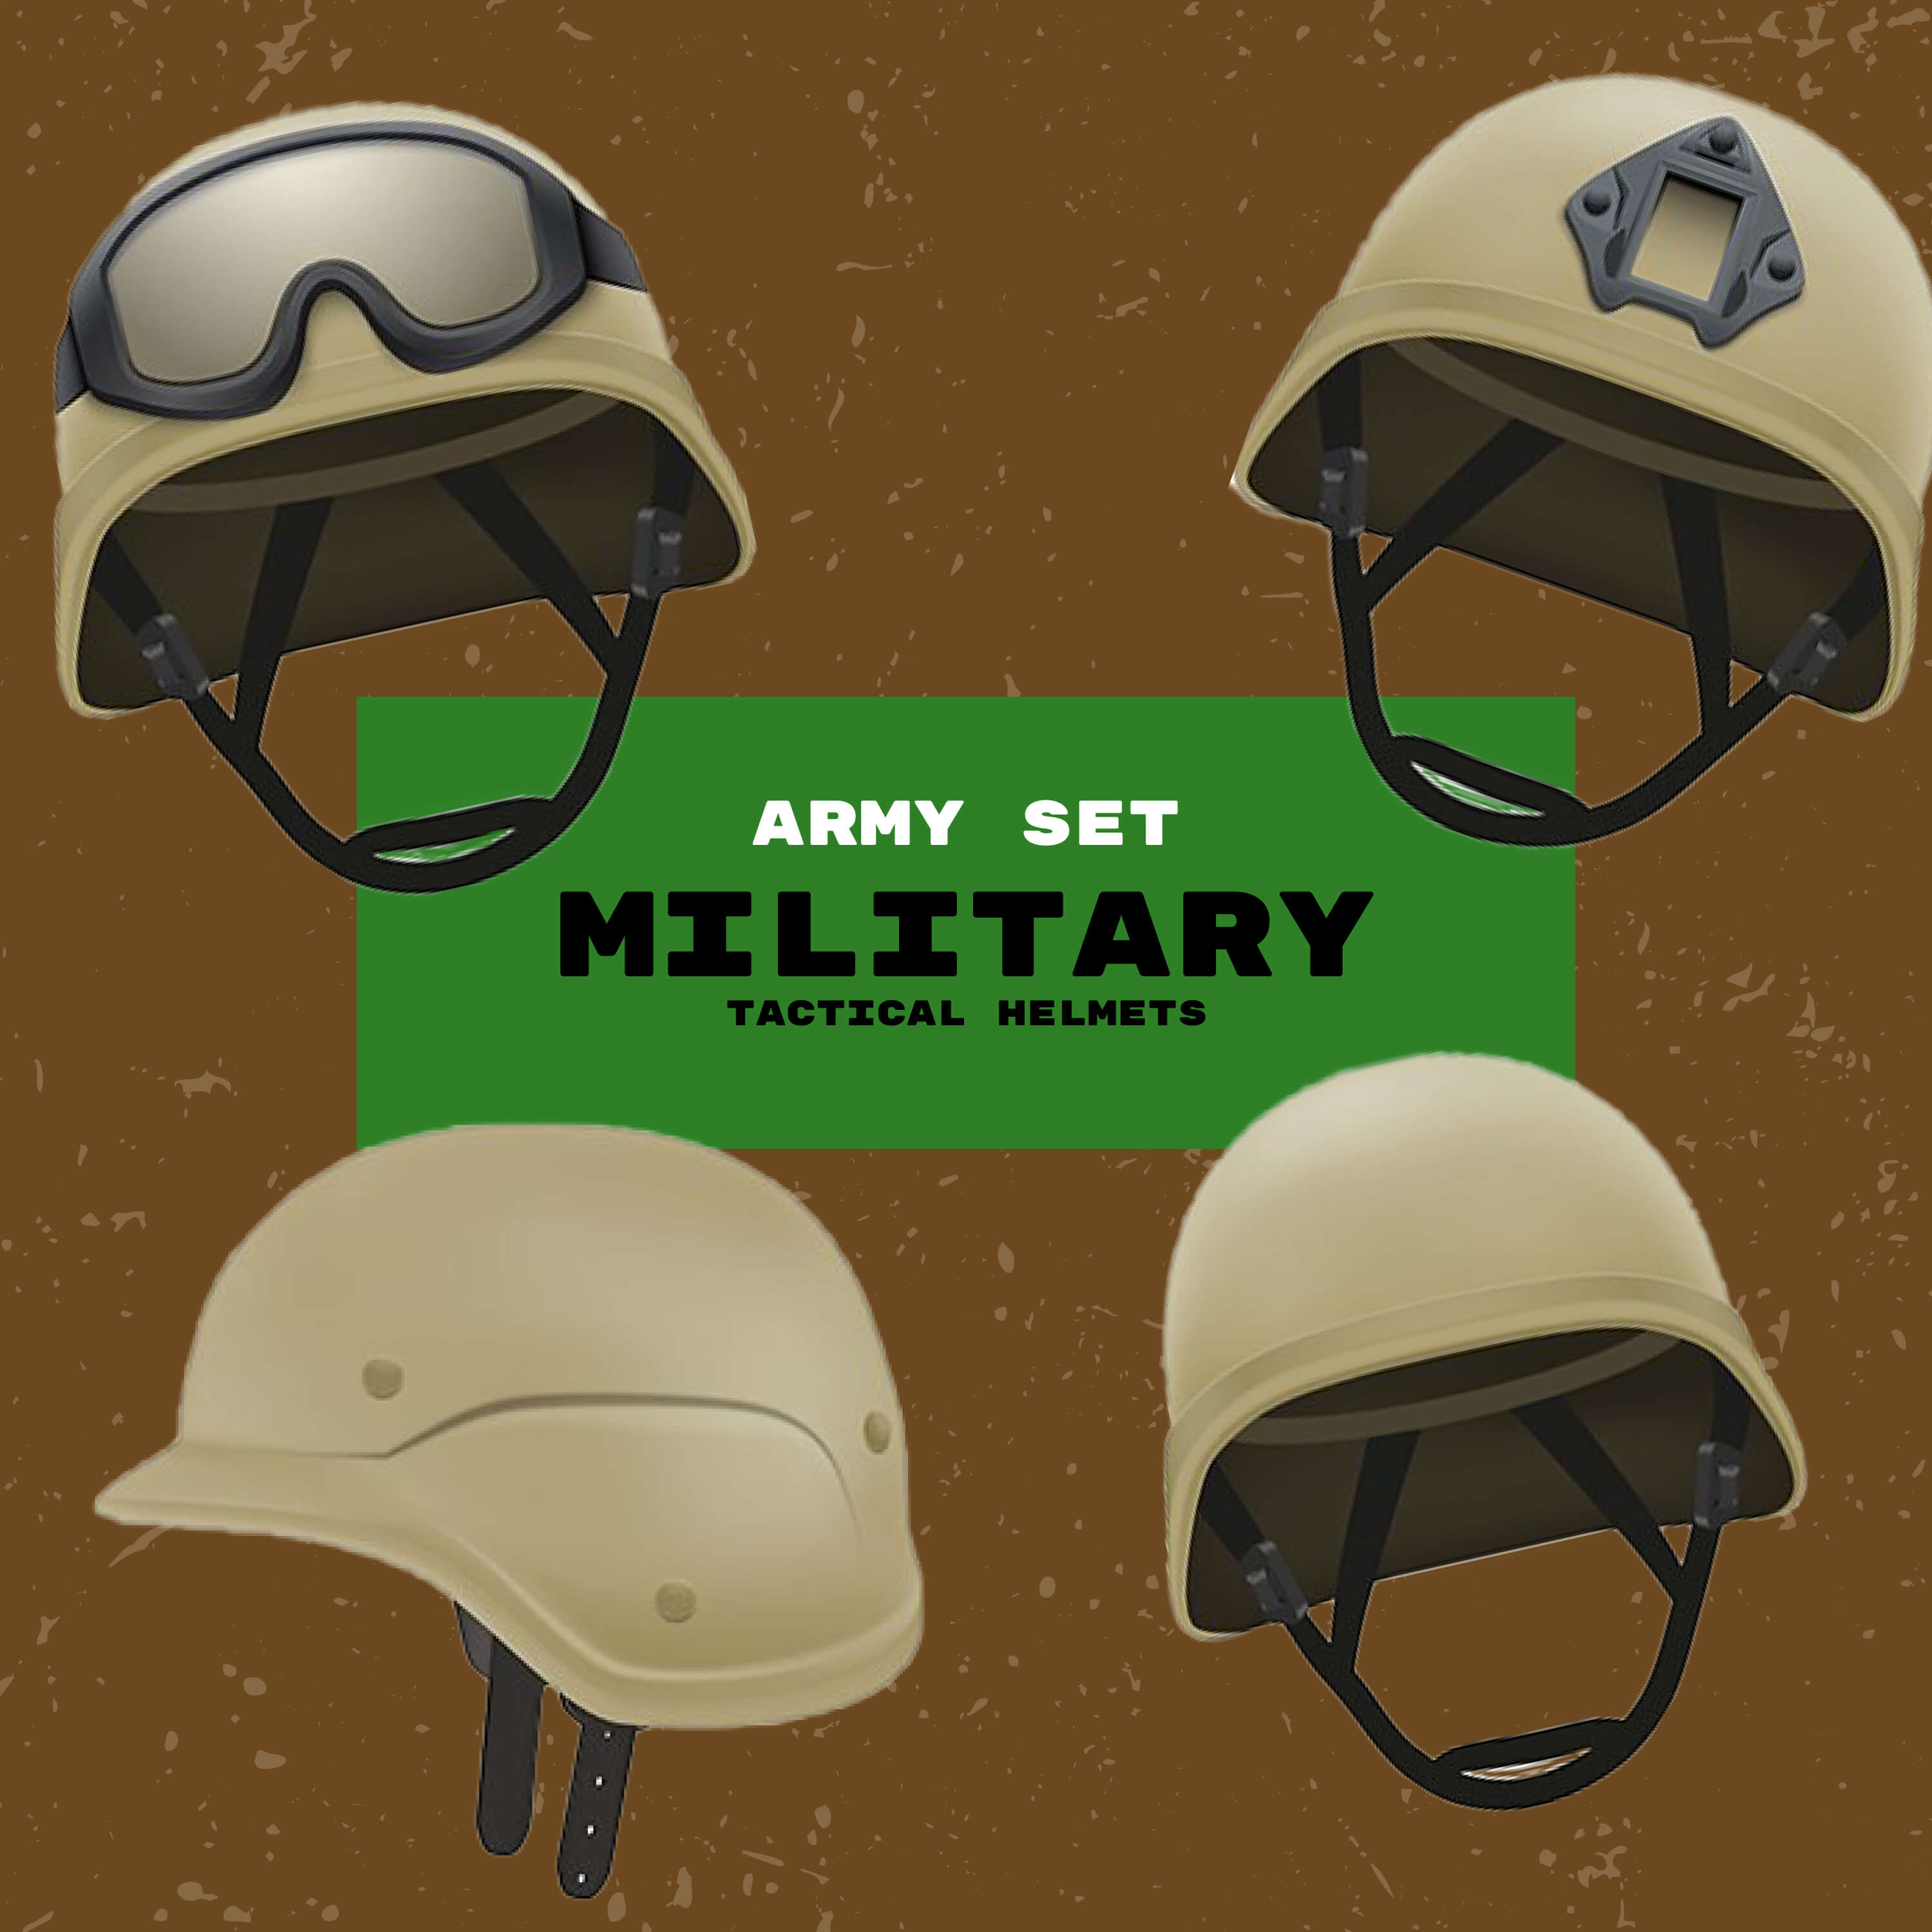 Army set military tactical helmets.